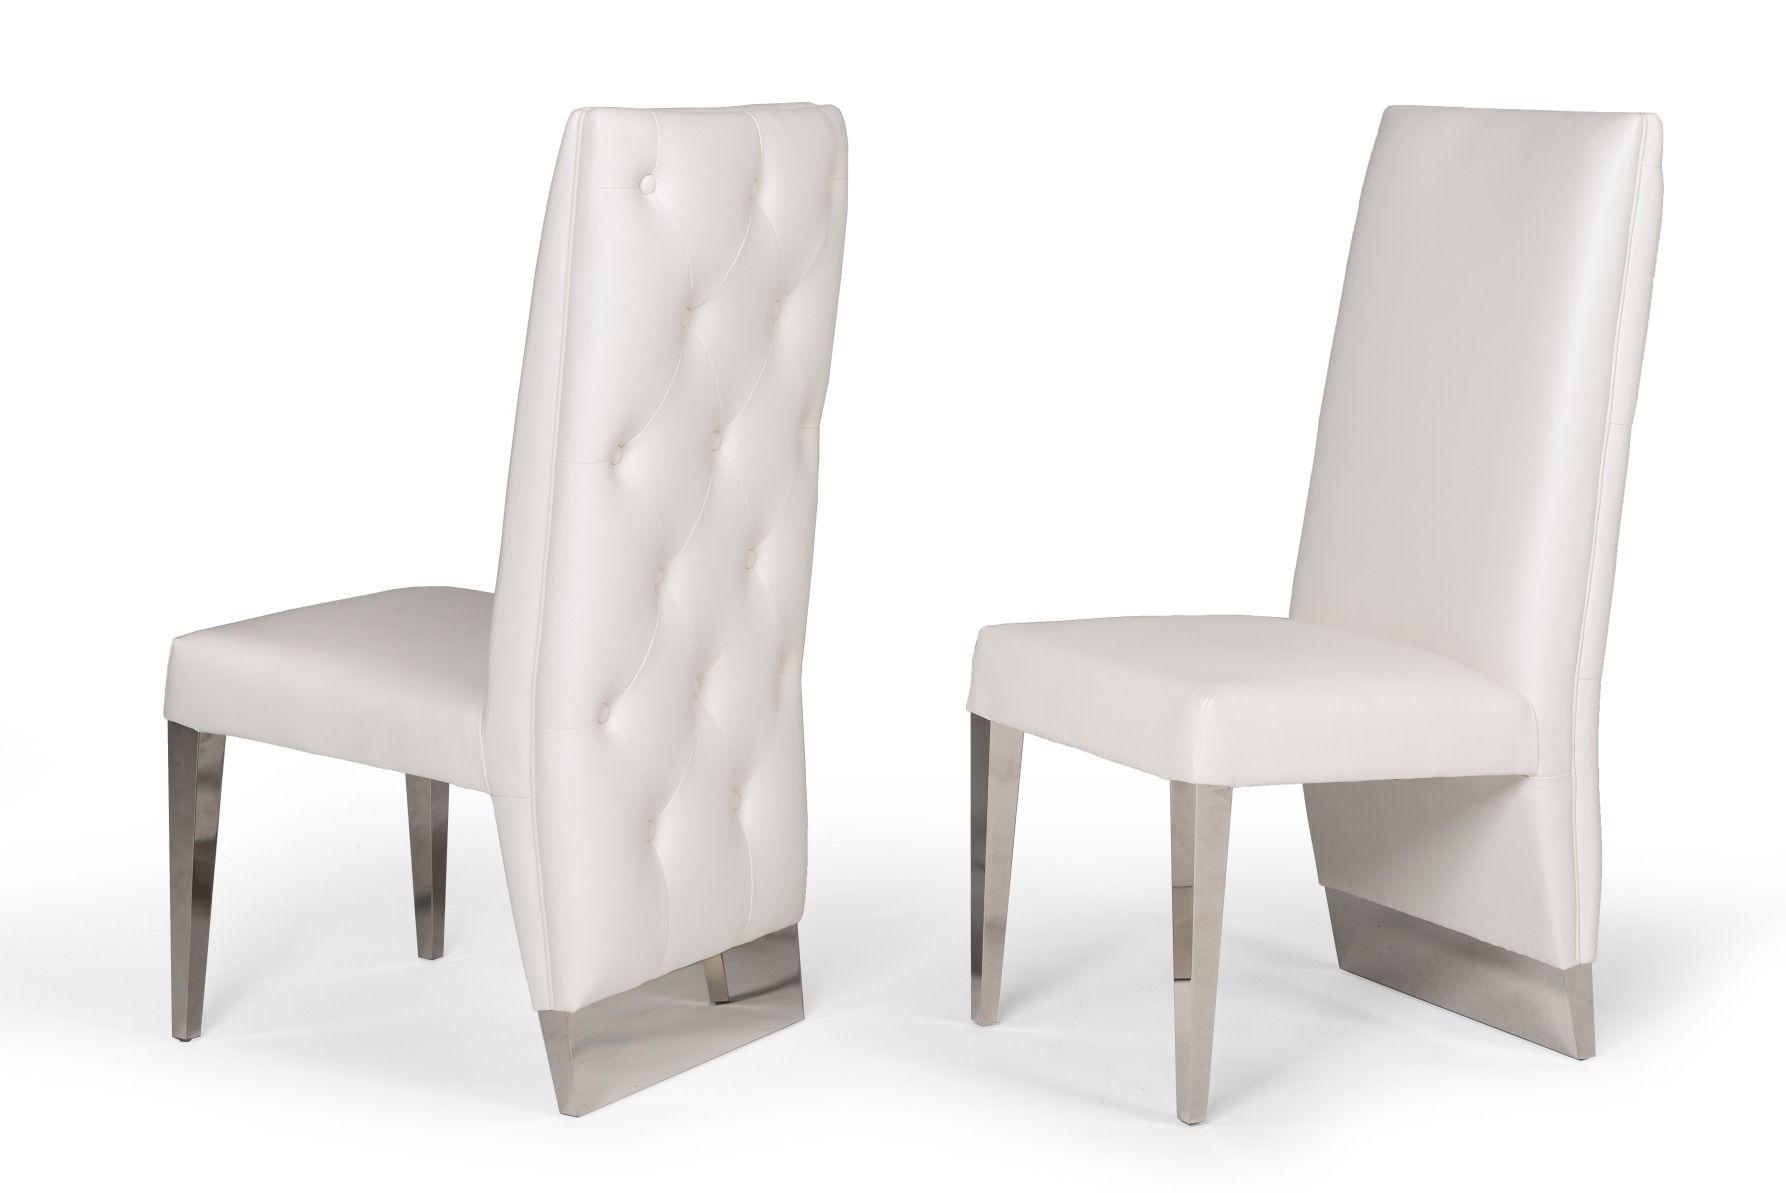 Contemporary, Modern Dining Chair Set Kilson VGVCB1819-WHT-2pcs in White Leatherette